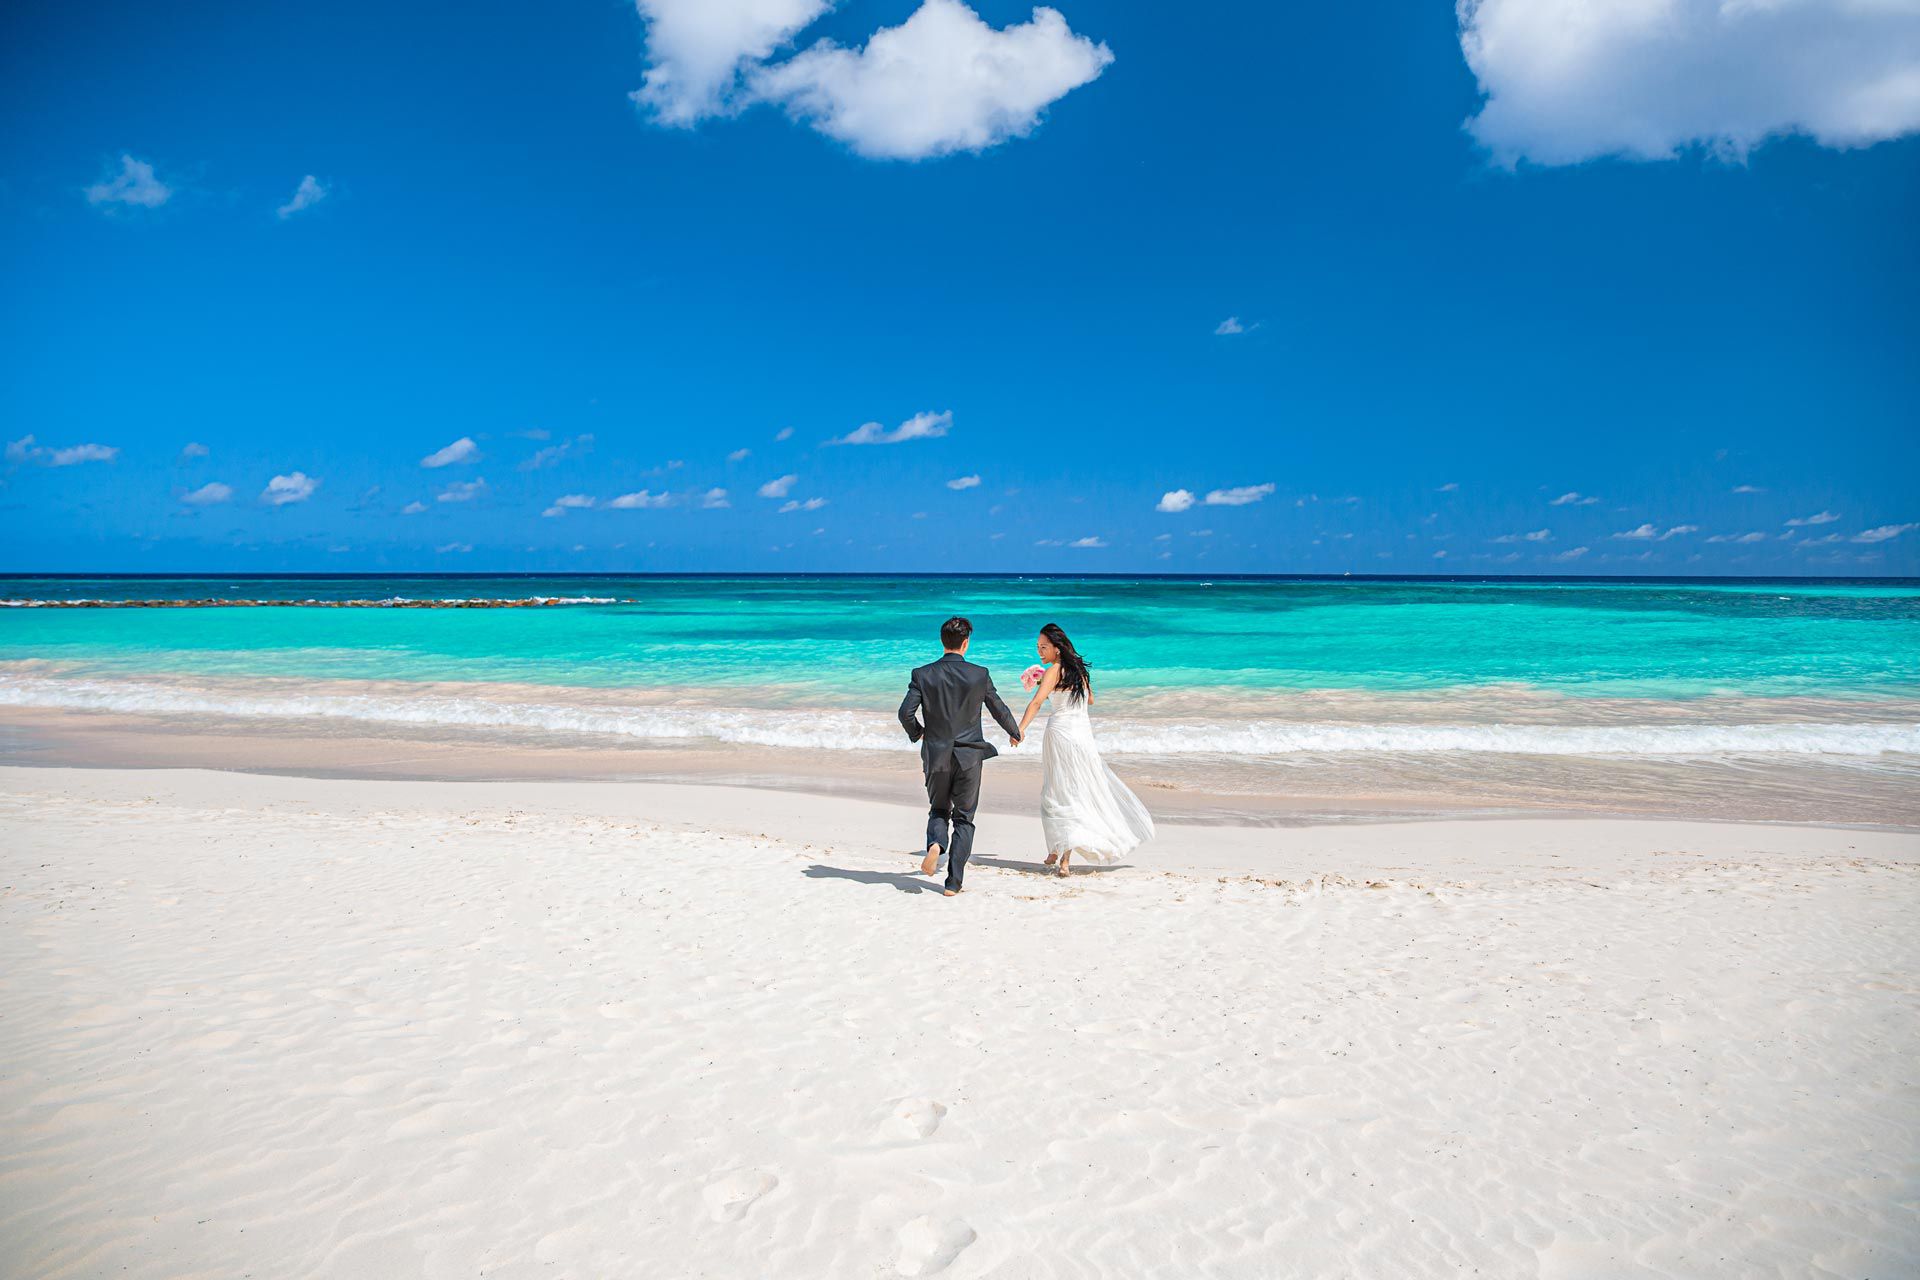 The Complete Guide For A Magical Beach Elopement Ceremony In The Caribbean